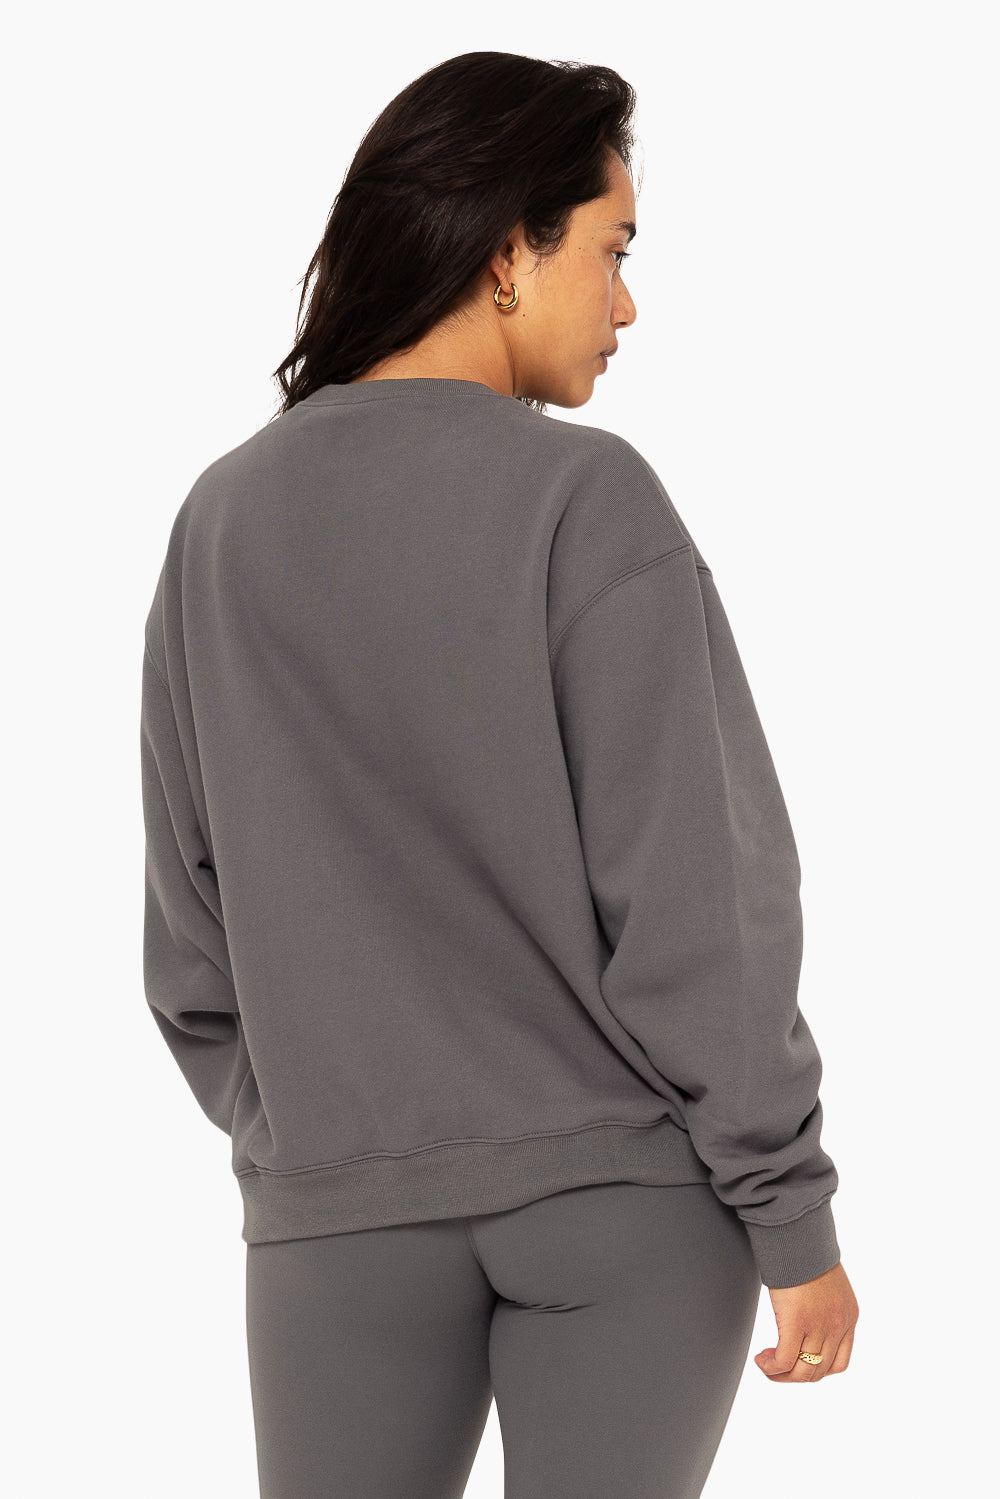 SET™ EMBROIDERED HEAVYWEIGHT SWEATS CREWNECK IN GRAPHITE